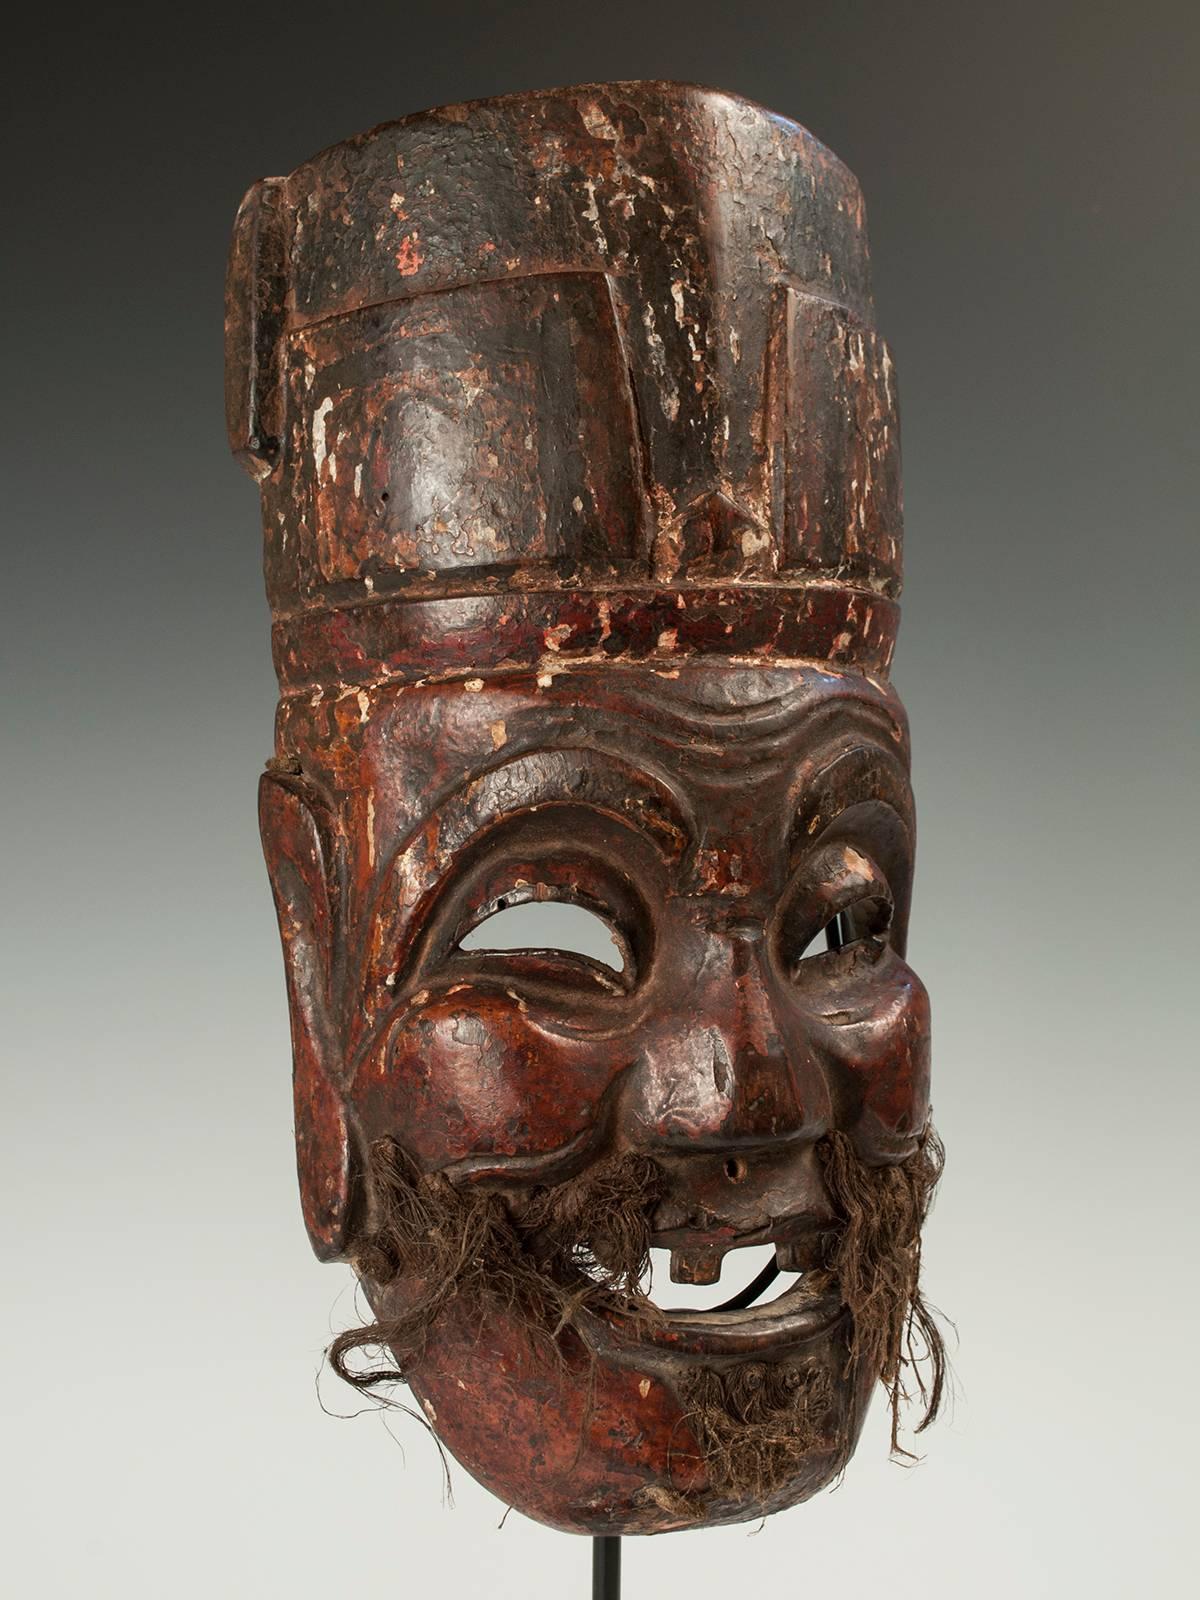 Late 19th-early 20th century Nuo Theater Mask depicting the god Tudi Gong, meaning 'Lord of the Place' in Chinese. The functions and deification of this god was local to each village, neighborhood and even home, so he was the ultimate bespoke deity.